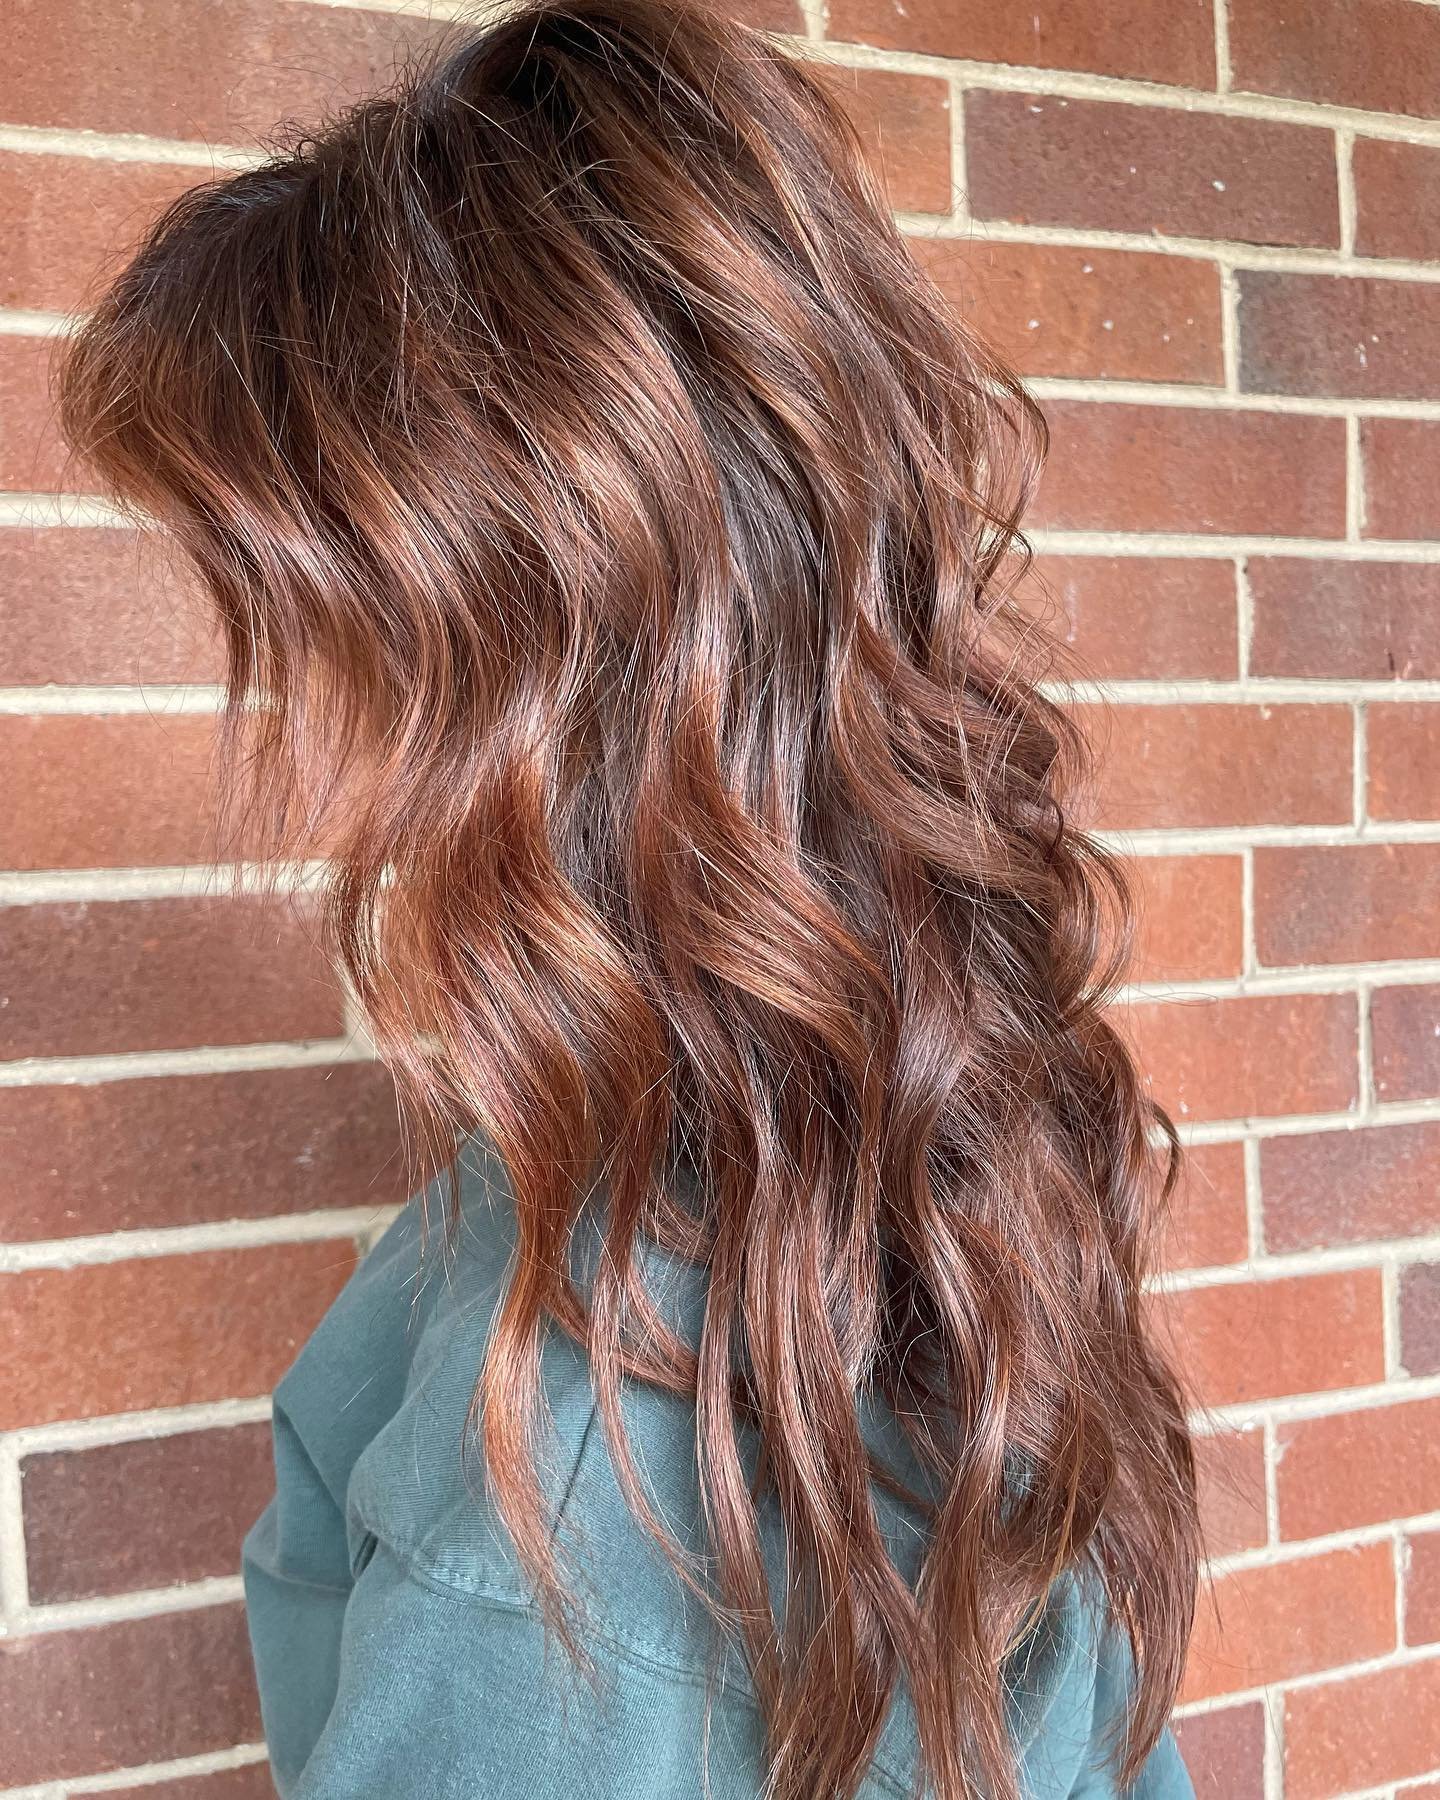 She walked in a blonde and walked out copper red babe!🔥🔥

@itsmelanieaubert and I have been dreaming of doing this color for a while now and today it just felt right to start a new and go for it. I&rsquo;m SO happy we did. It is literally STUNNING 